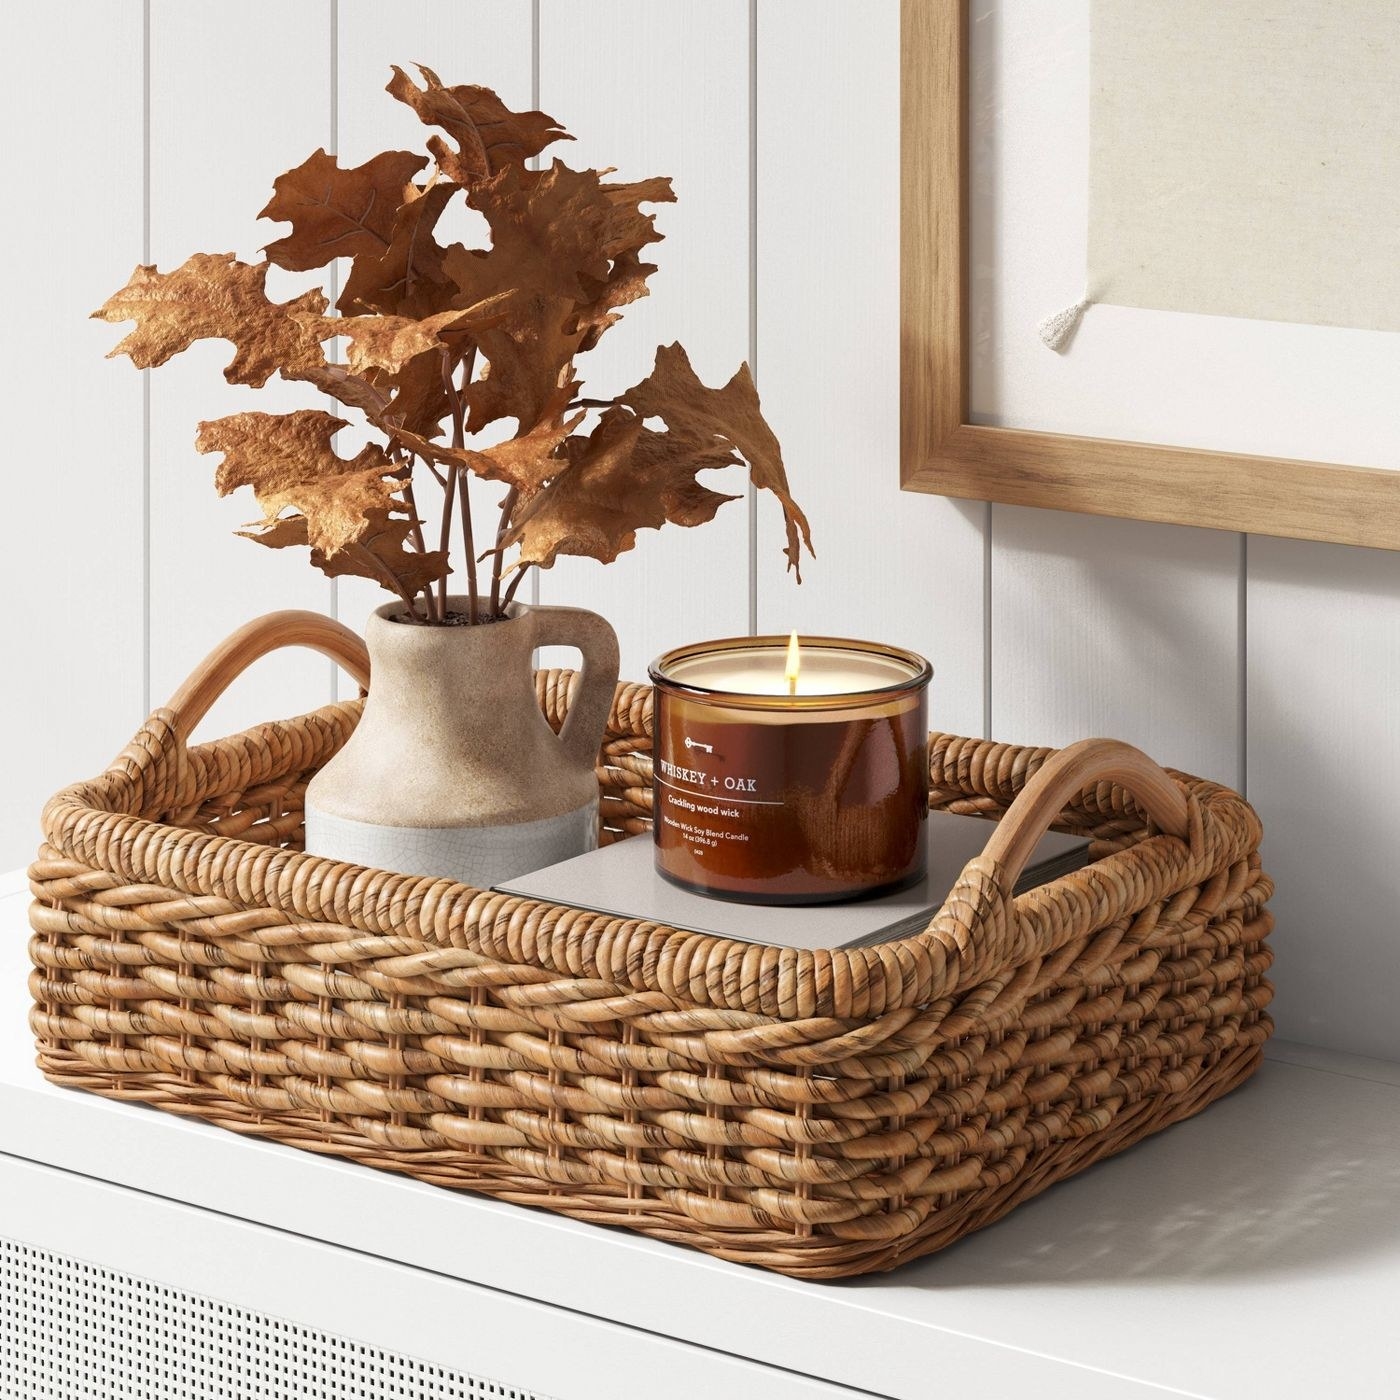 The rattan tray with a candle and vase in it